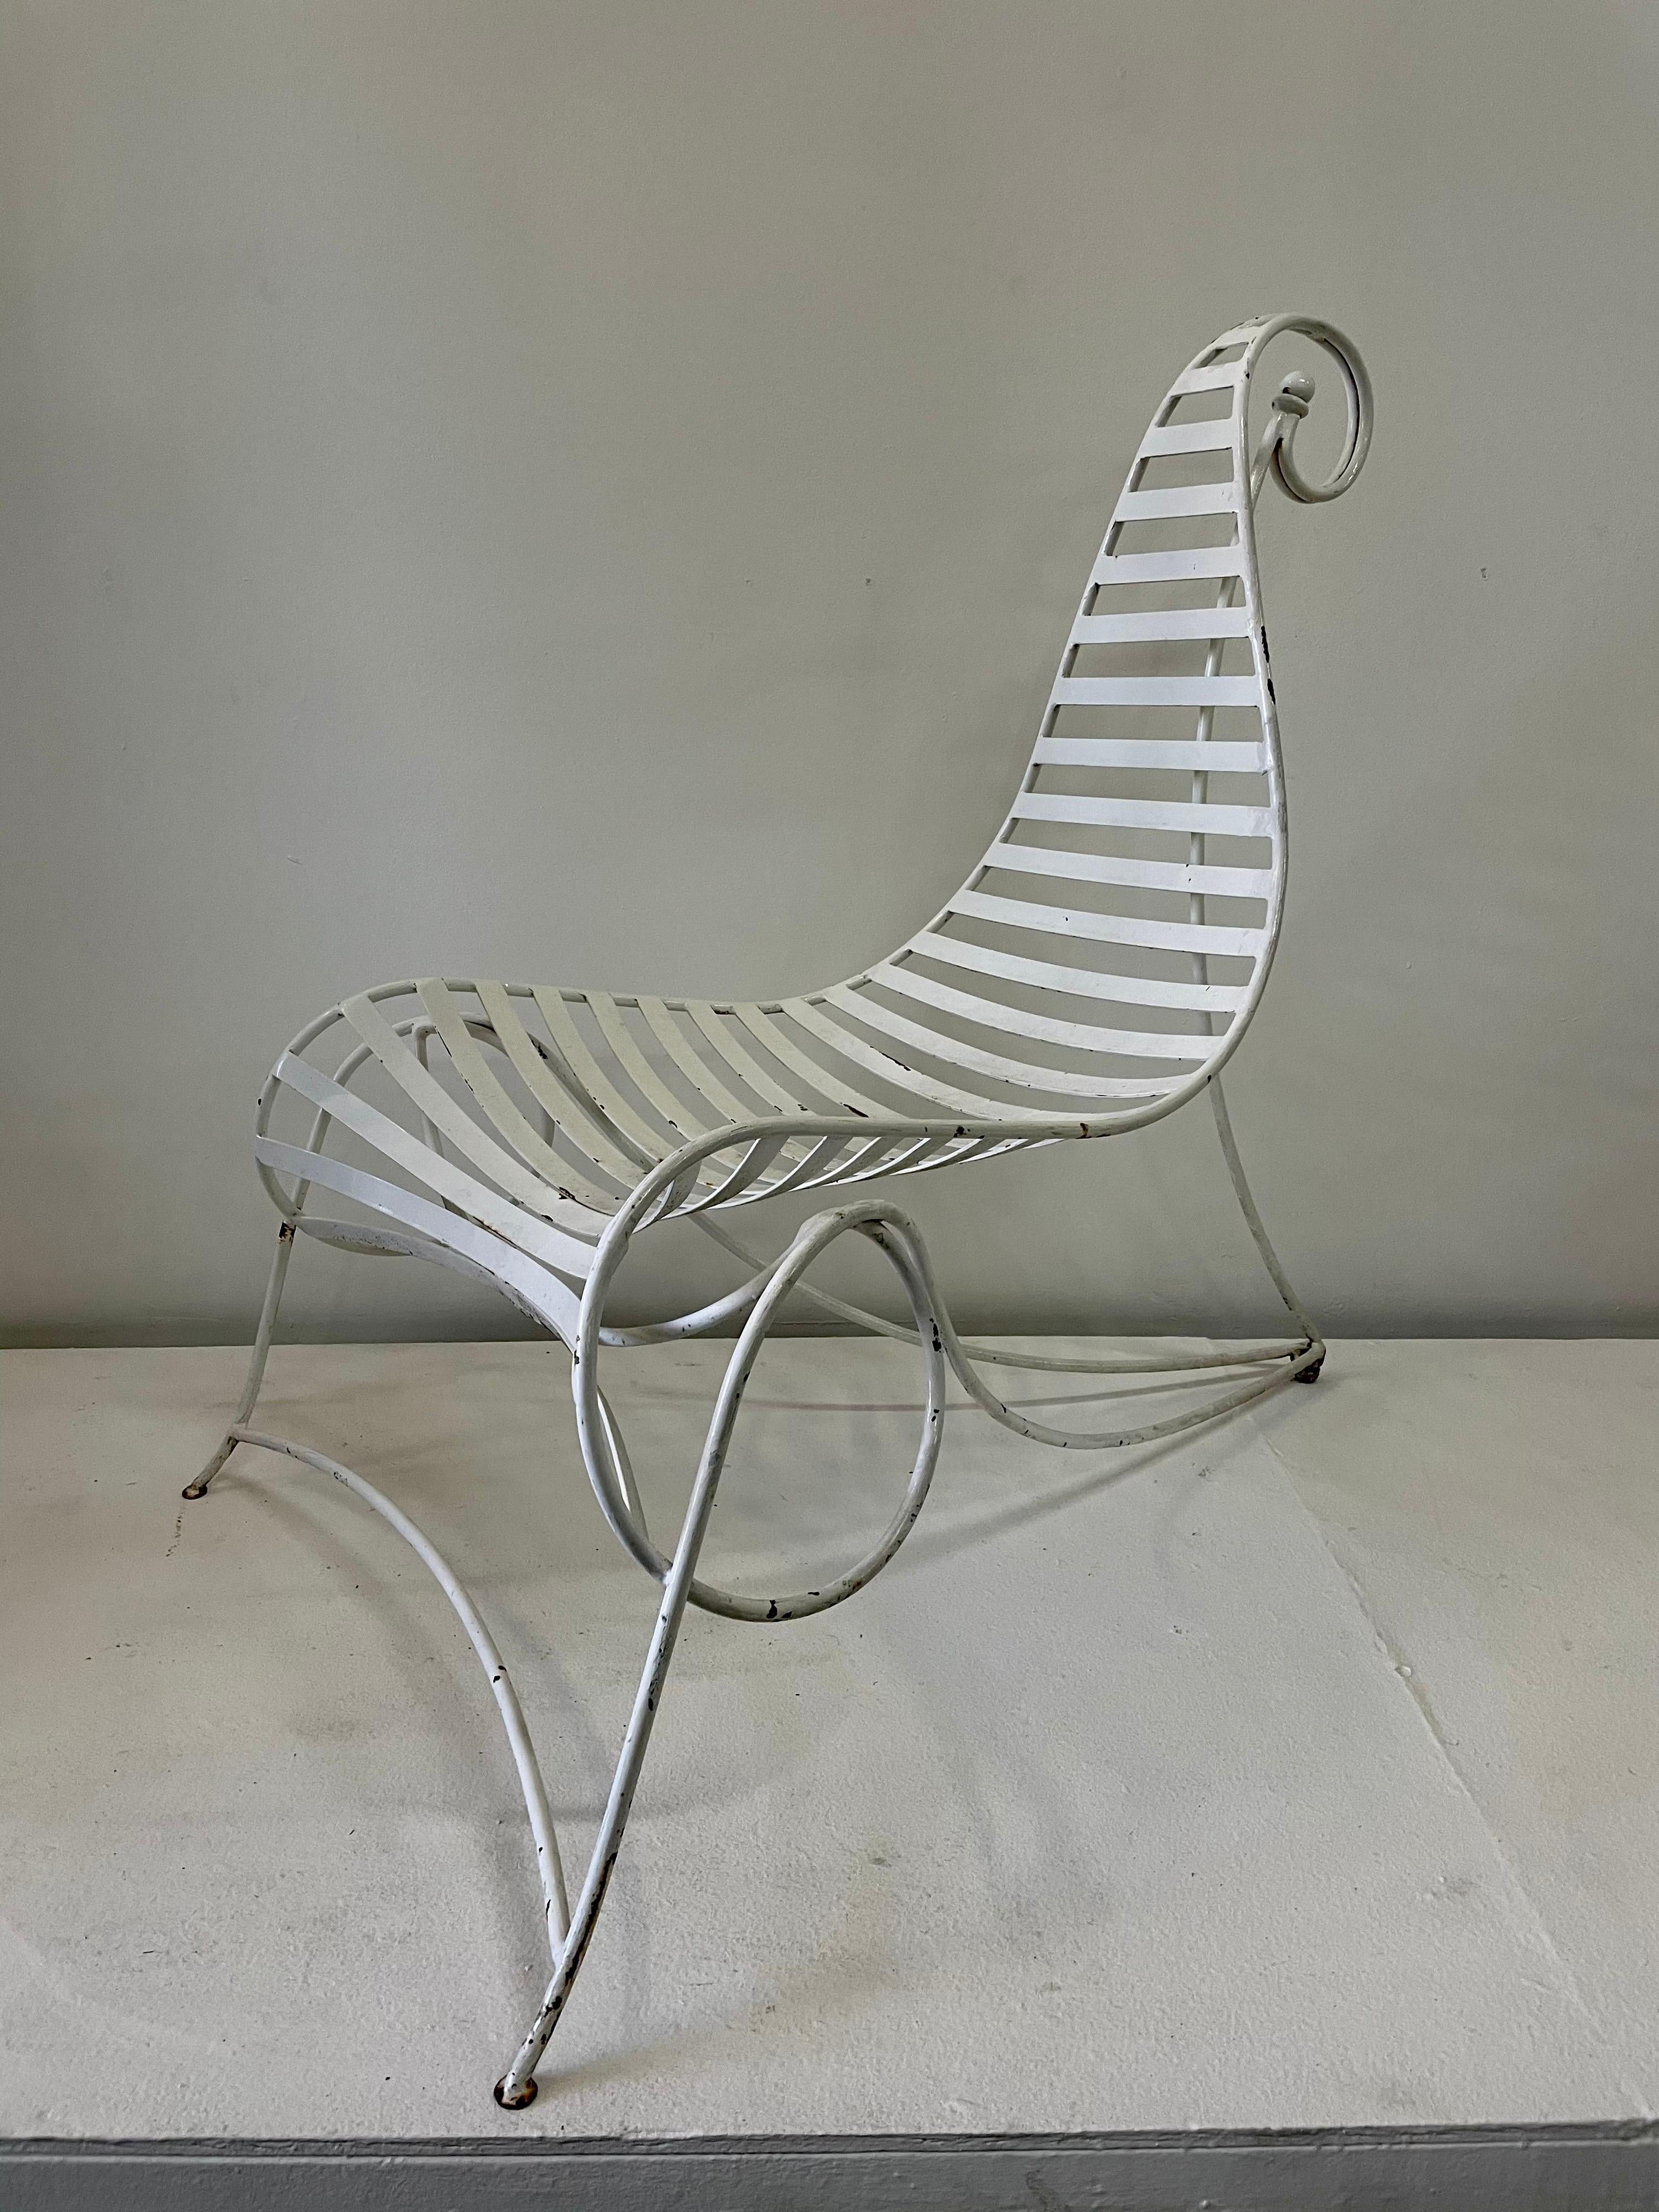 This whimsical and all vintage iron and metal chair is perfect for outdoors or indoors. Designed after André Dubreuil's iconic Spine chair.